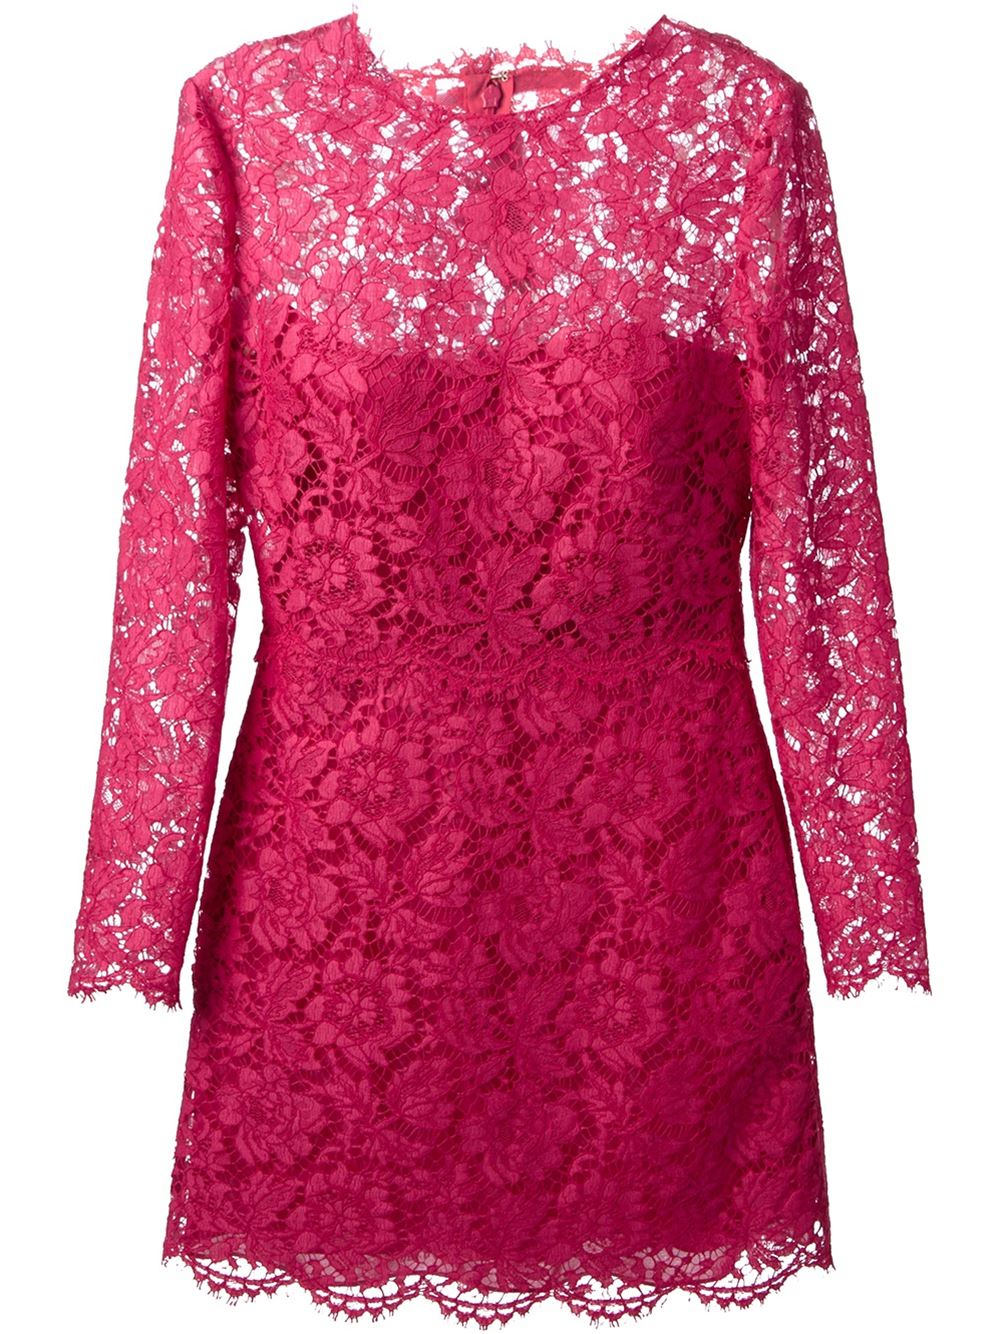 Valentino Lace Cocktail Dress in Pink - Lyst